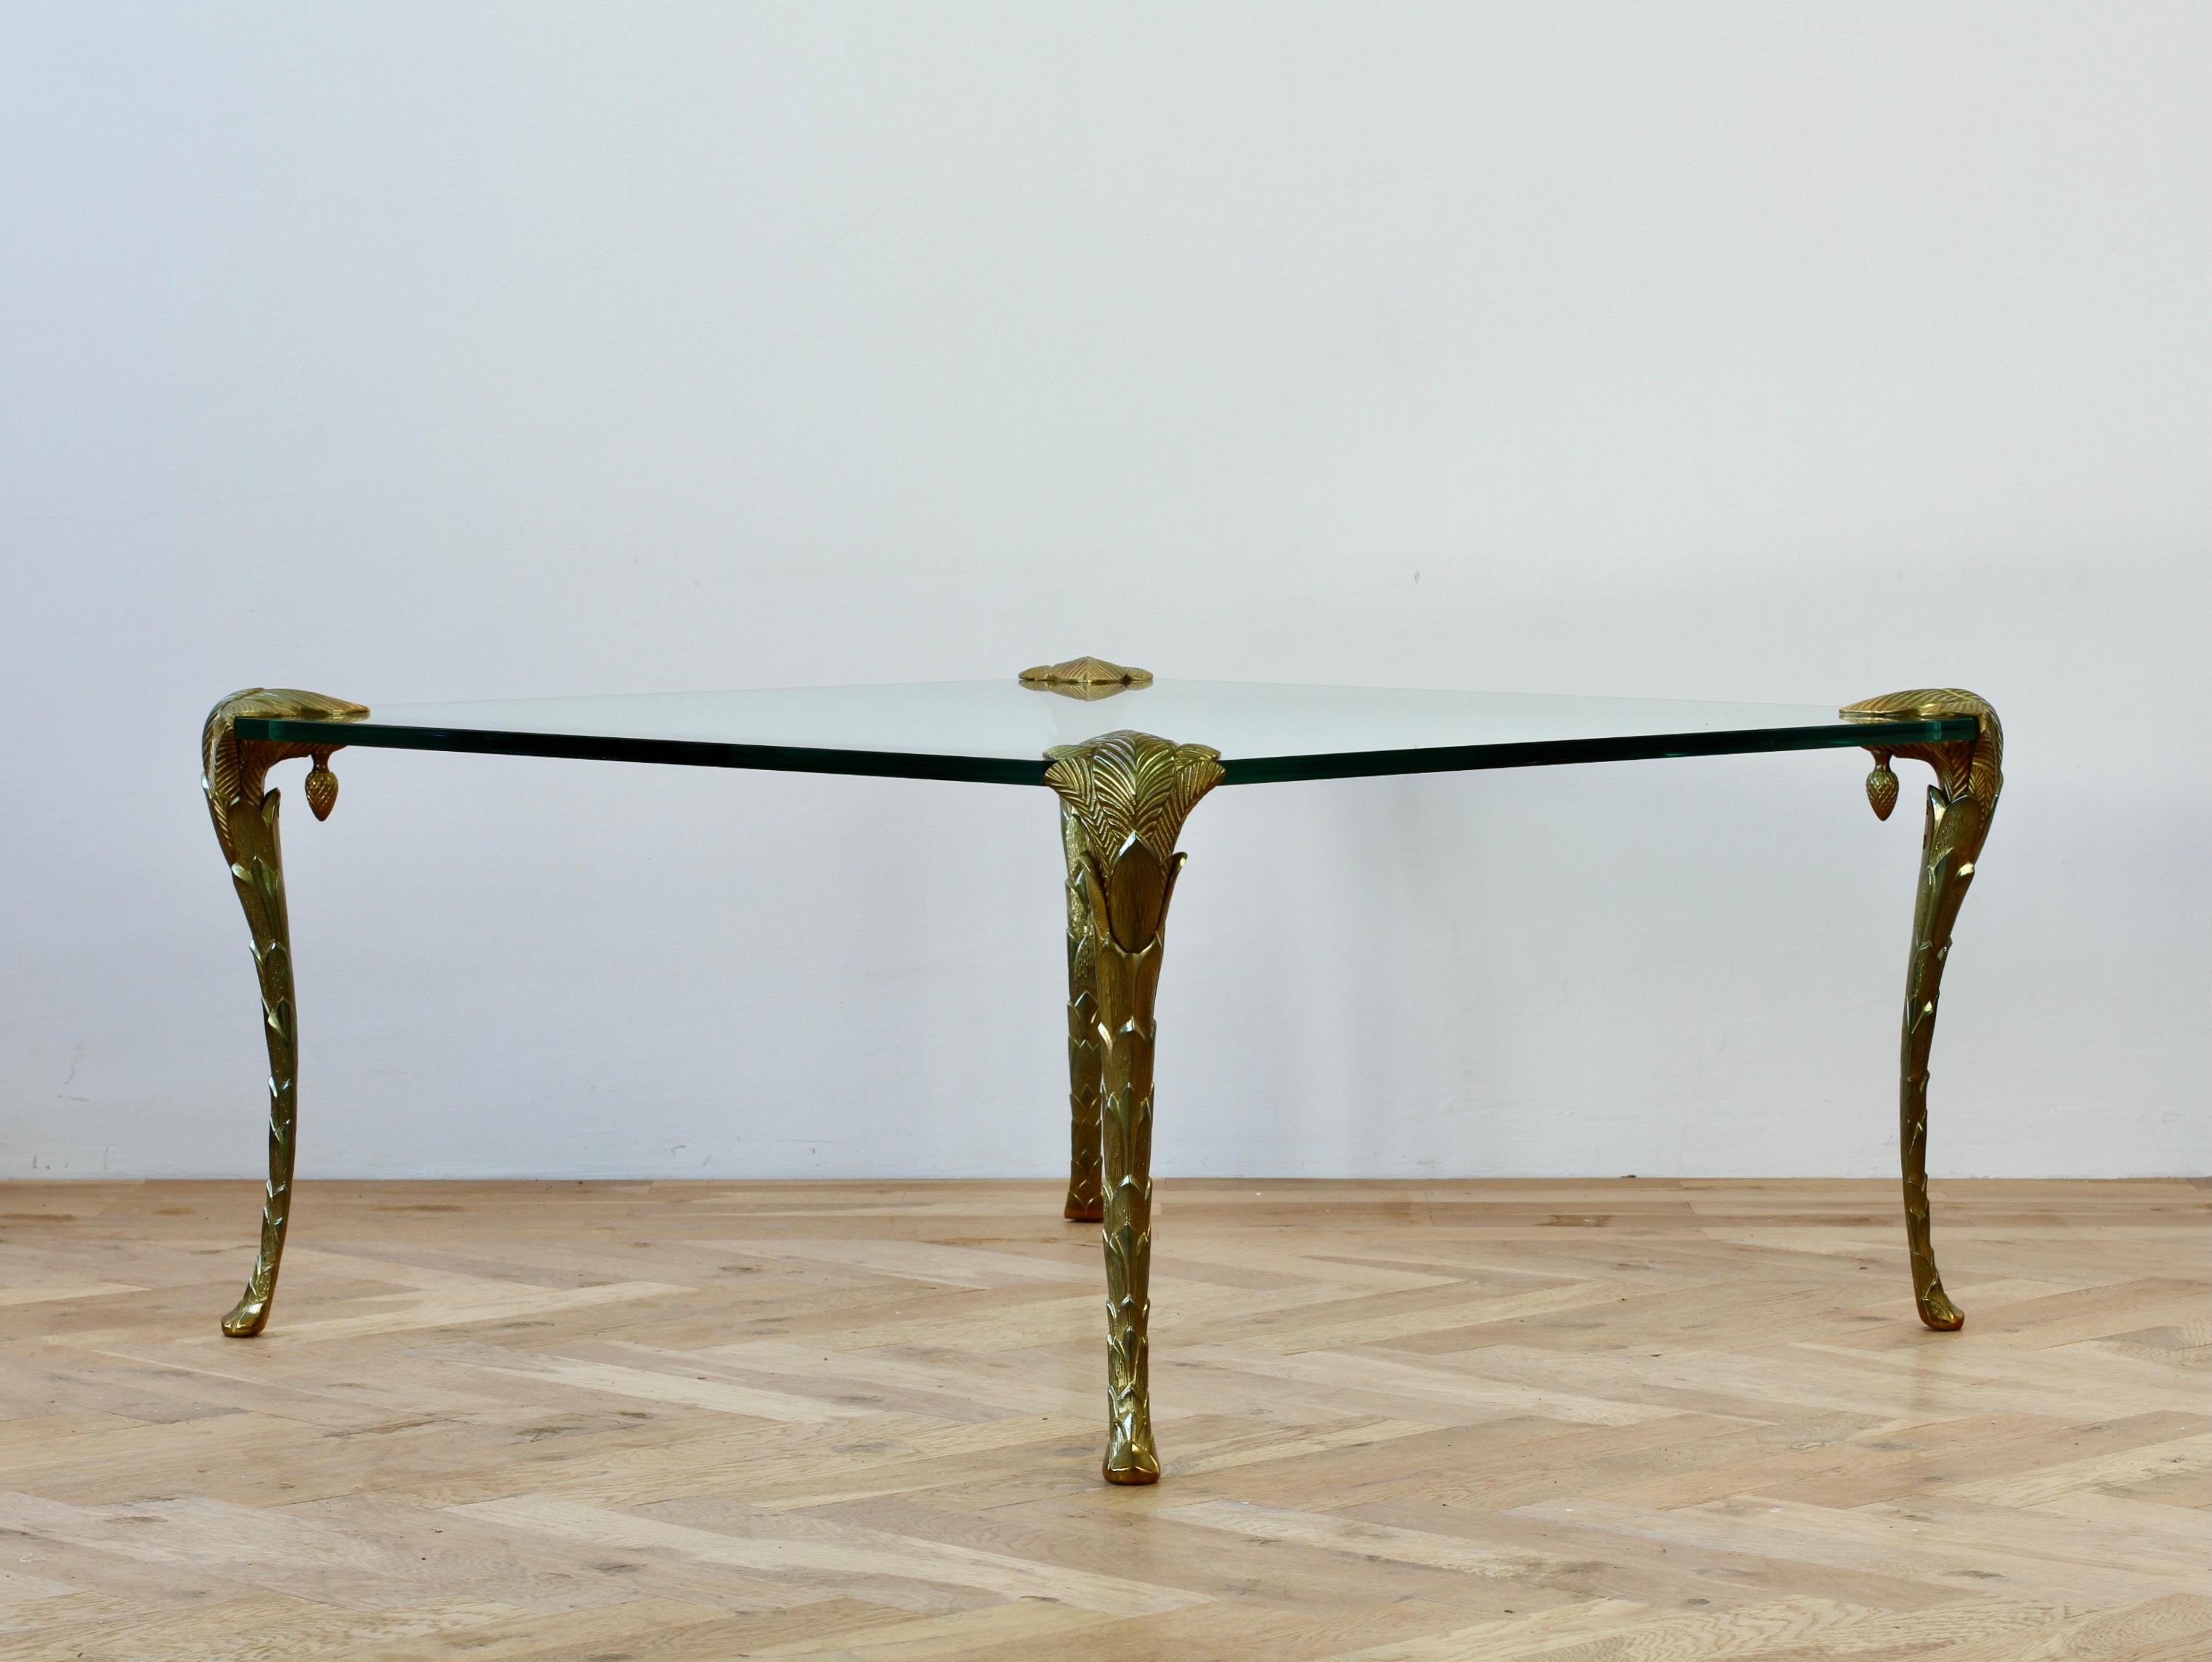 Charles for Maison Charles exceptionally rare 'Palme Pieds' (Palm legs), large gold-plated cast brass/bronze French coffee / center / side table. This is an early example which has the 'pine cone' finals to tighten the legs to the glass table top -